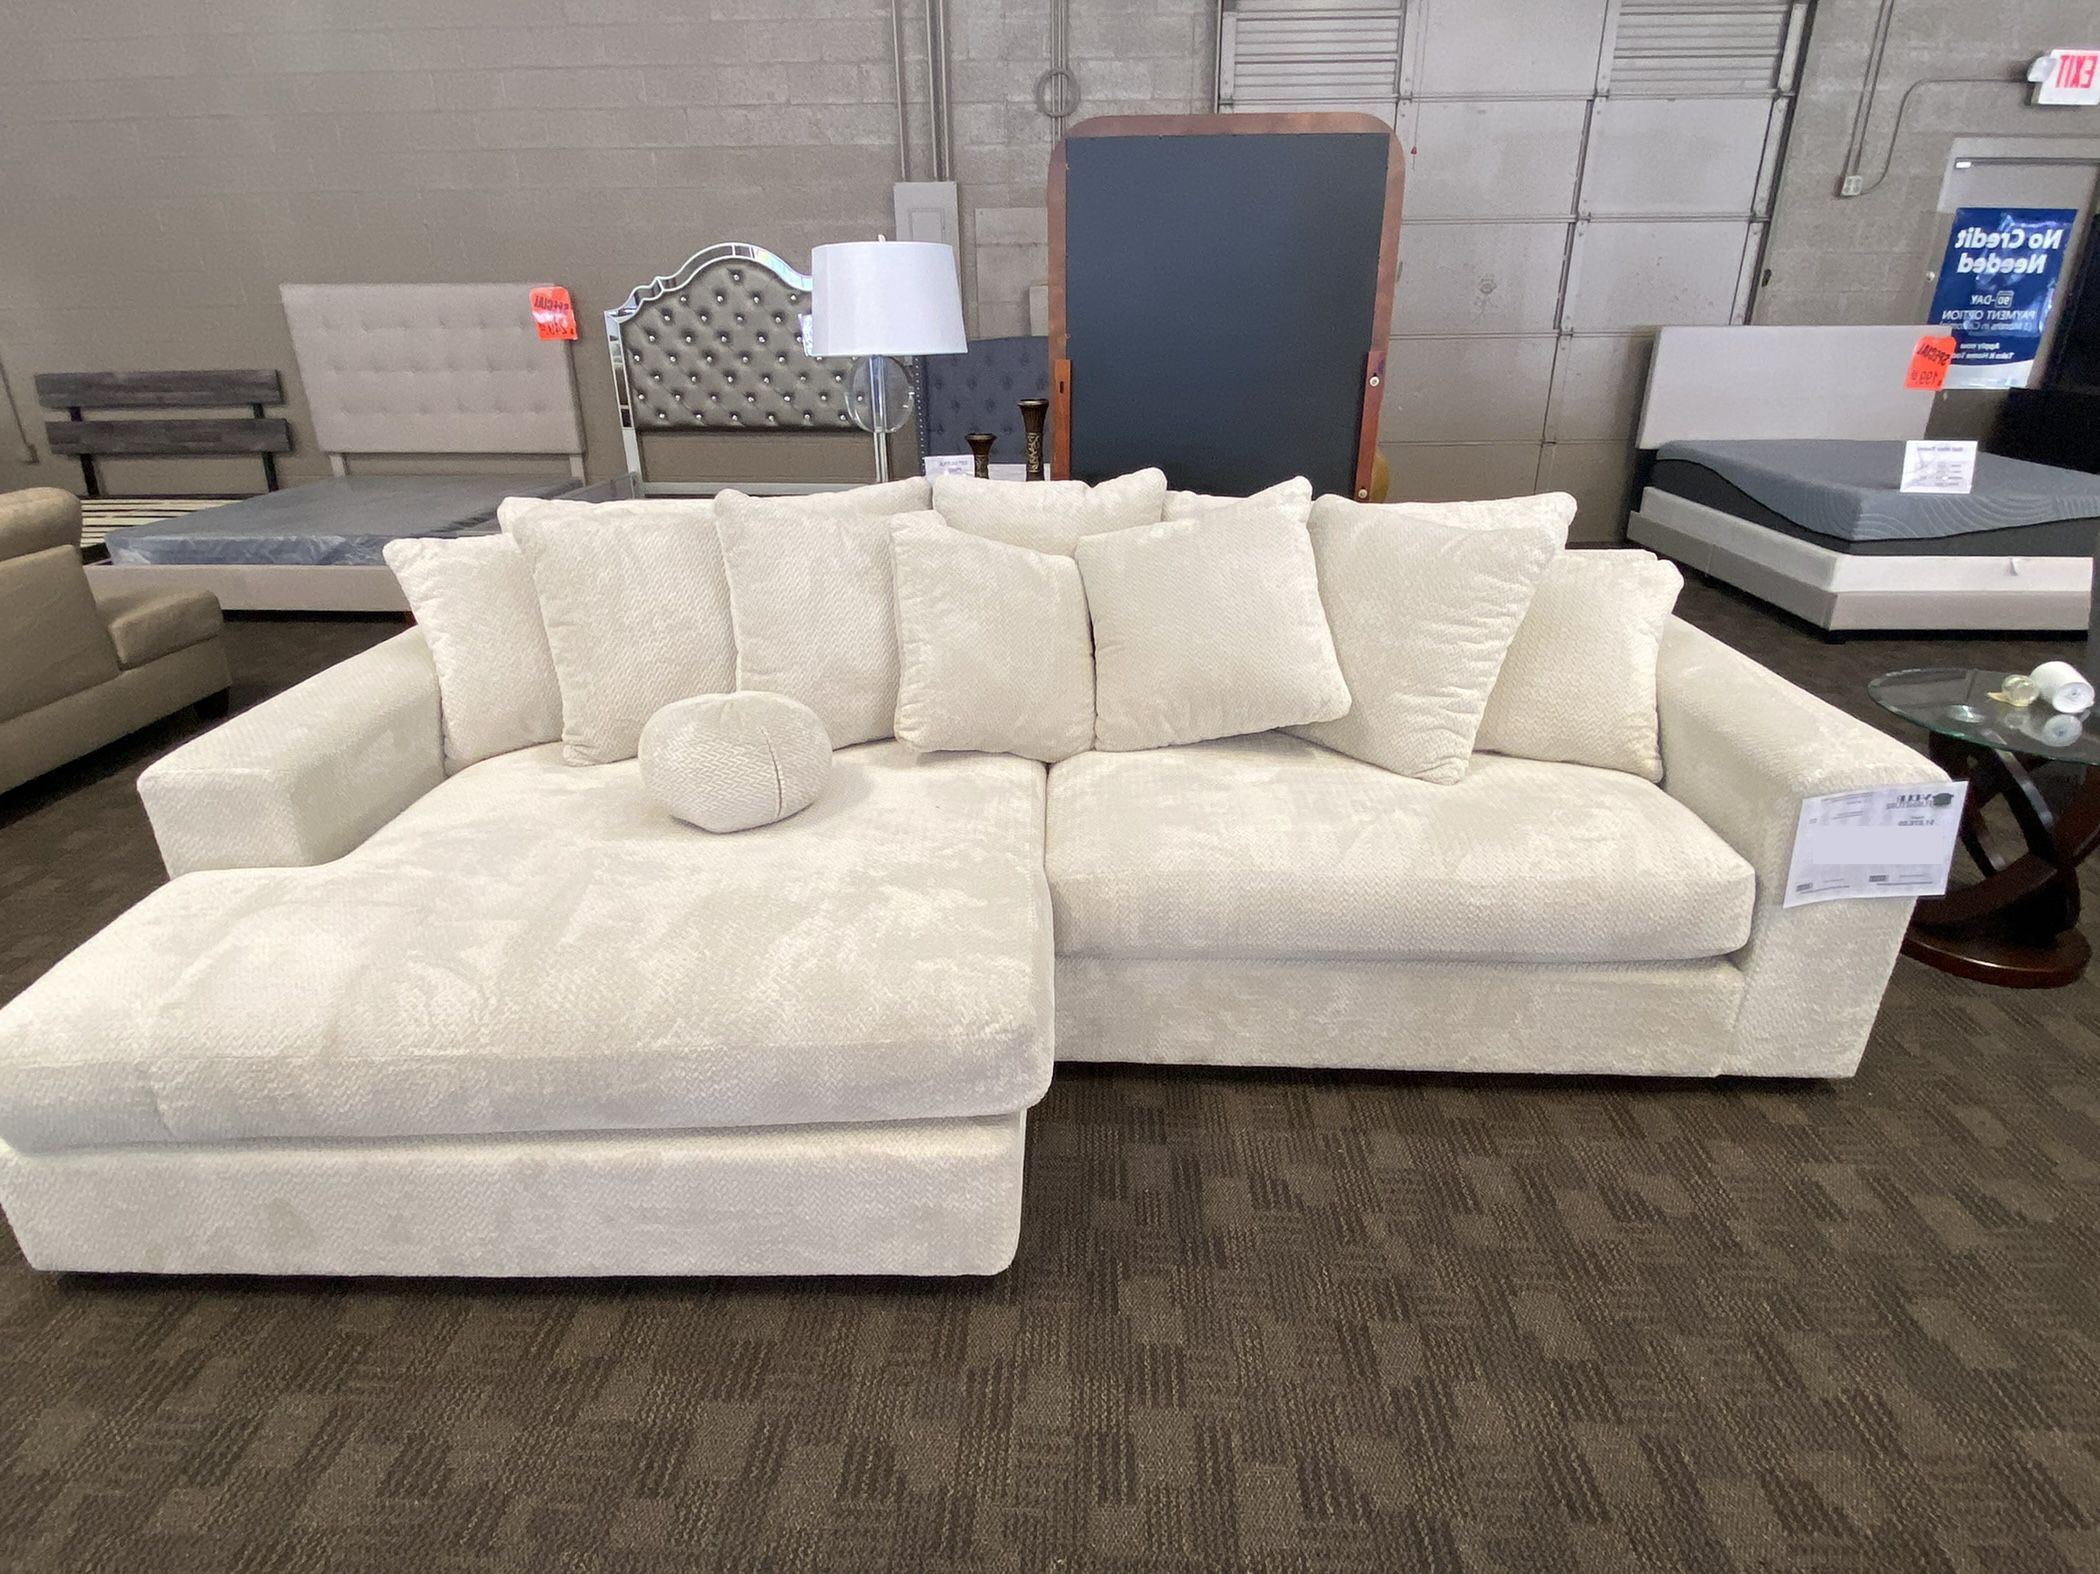 Oversized White Cream Sectional Couch